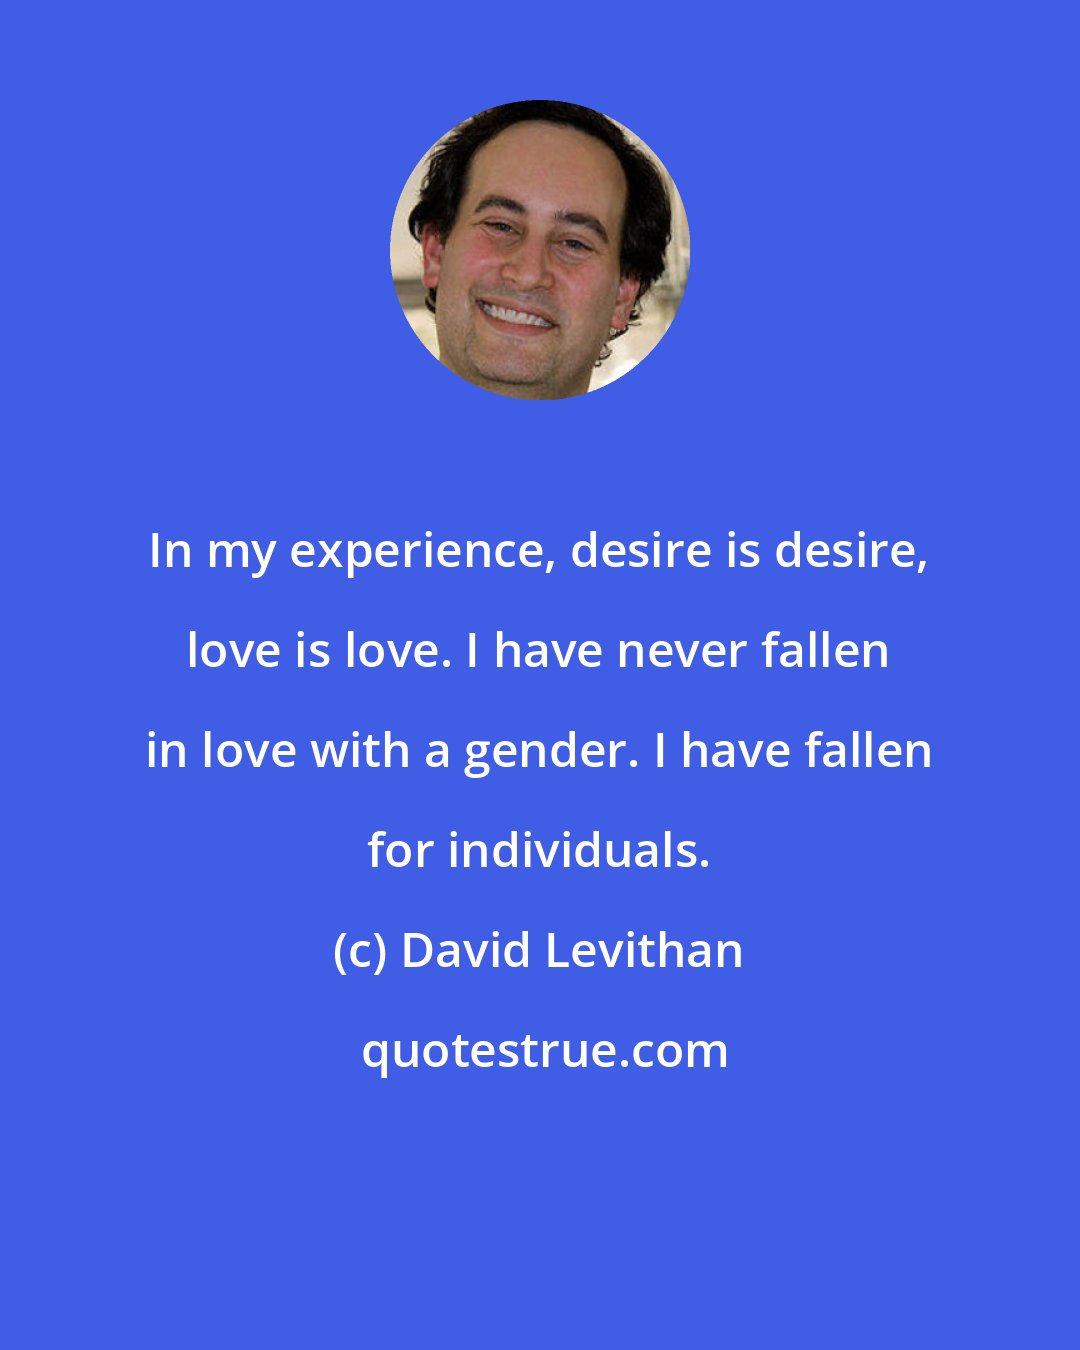 David Levithan: In my experience, desire is desire, love is love. I have never fallen in love with a gender. I have fallen for individuals.